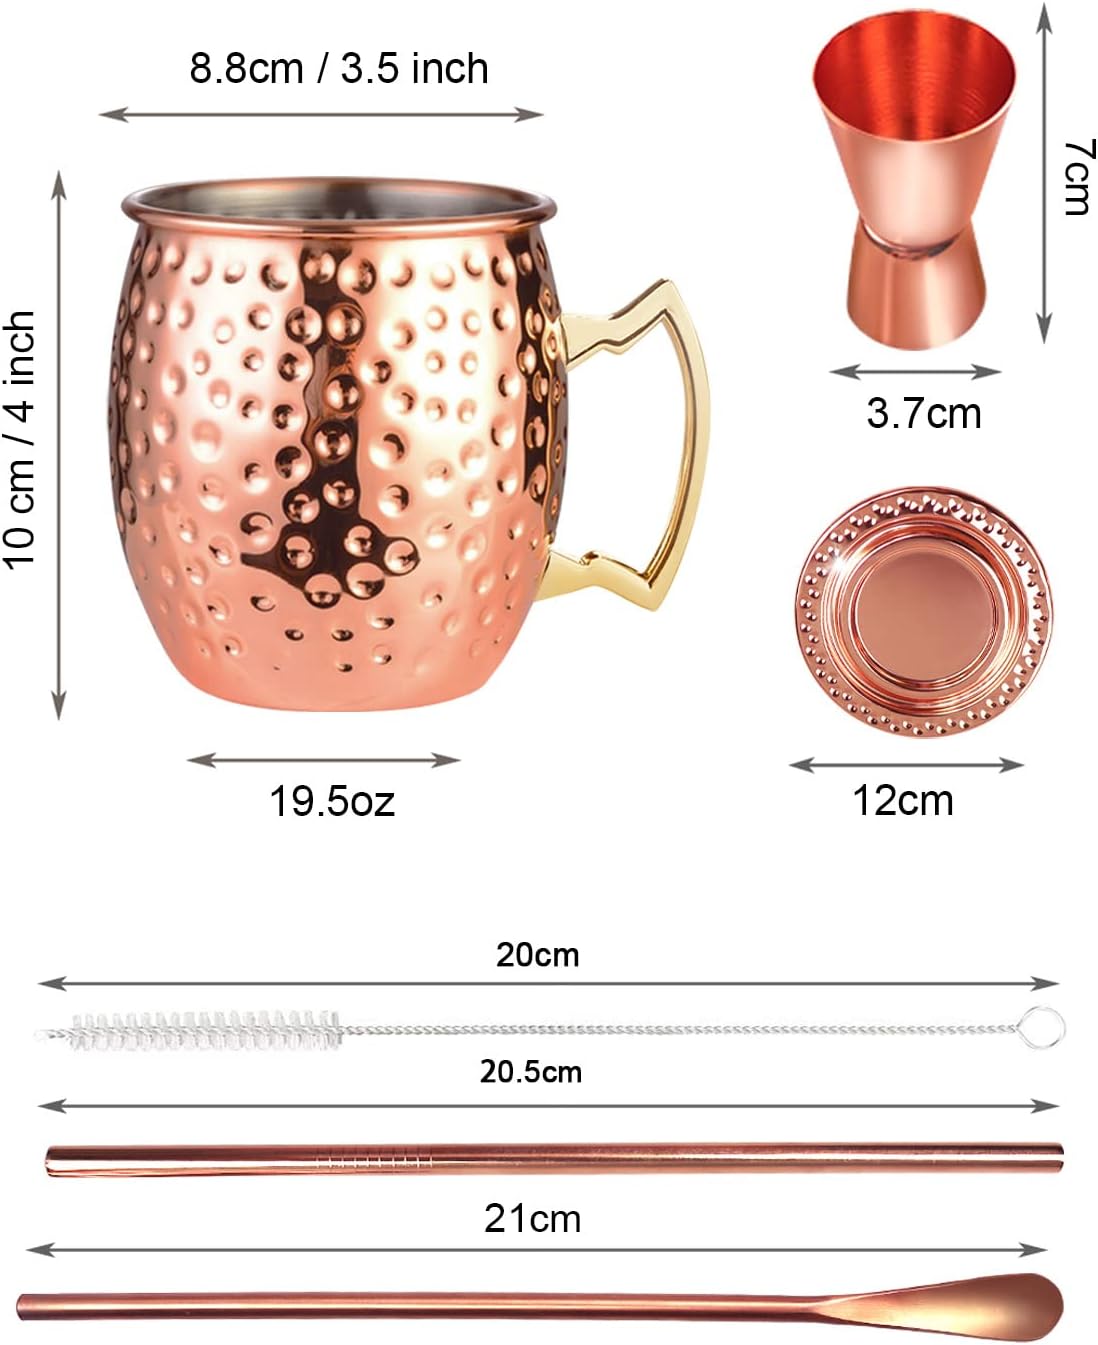 LIVEHITOP Moscow Mule Mug Set of 4 PC, 19.5oz Hammered Copper Cup with Copper Coasters and 4 Copper Straws for Cocktail, Beer, Cold Drink, Home, Bar, Party, Gifts